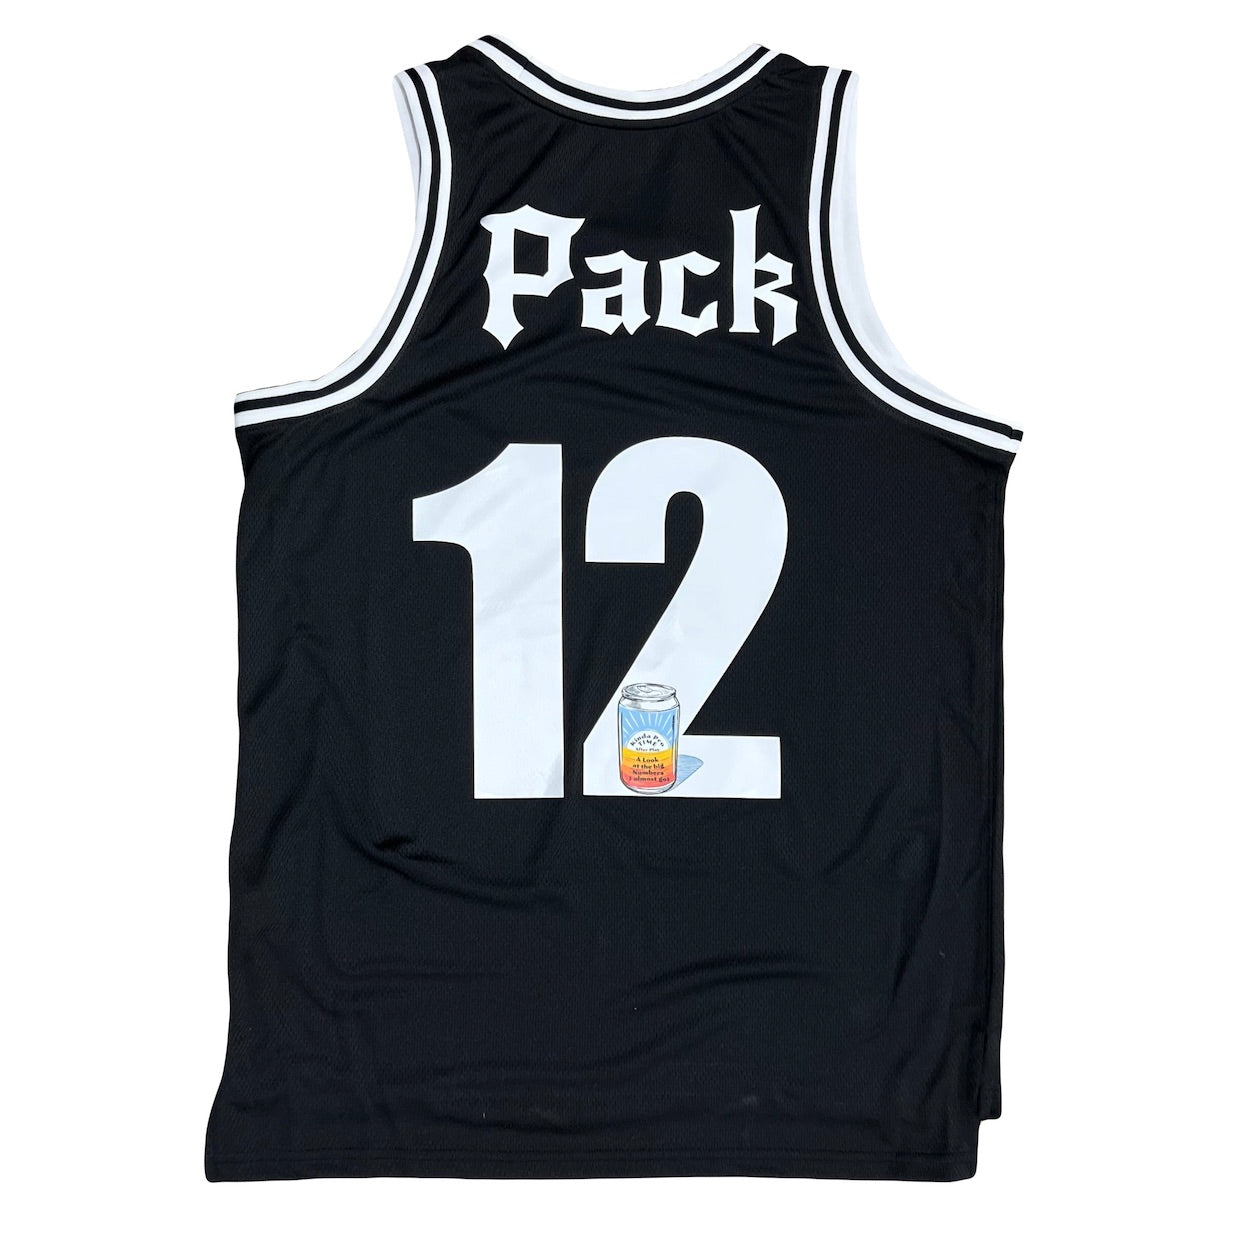 12 Pack Jersey